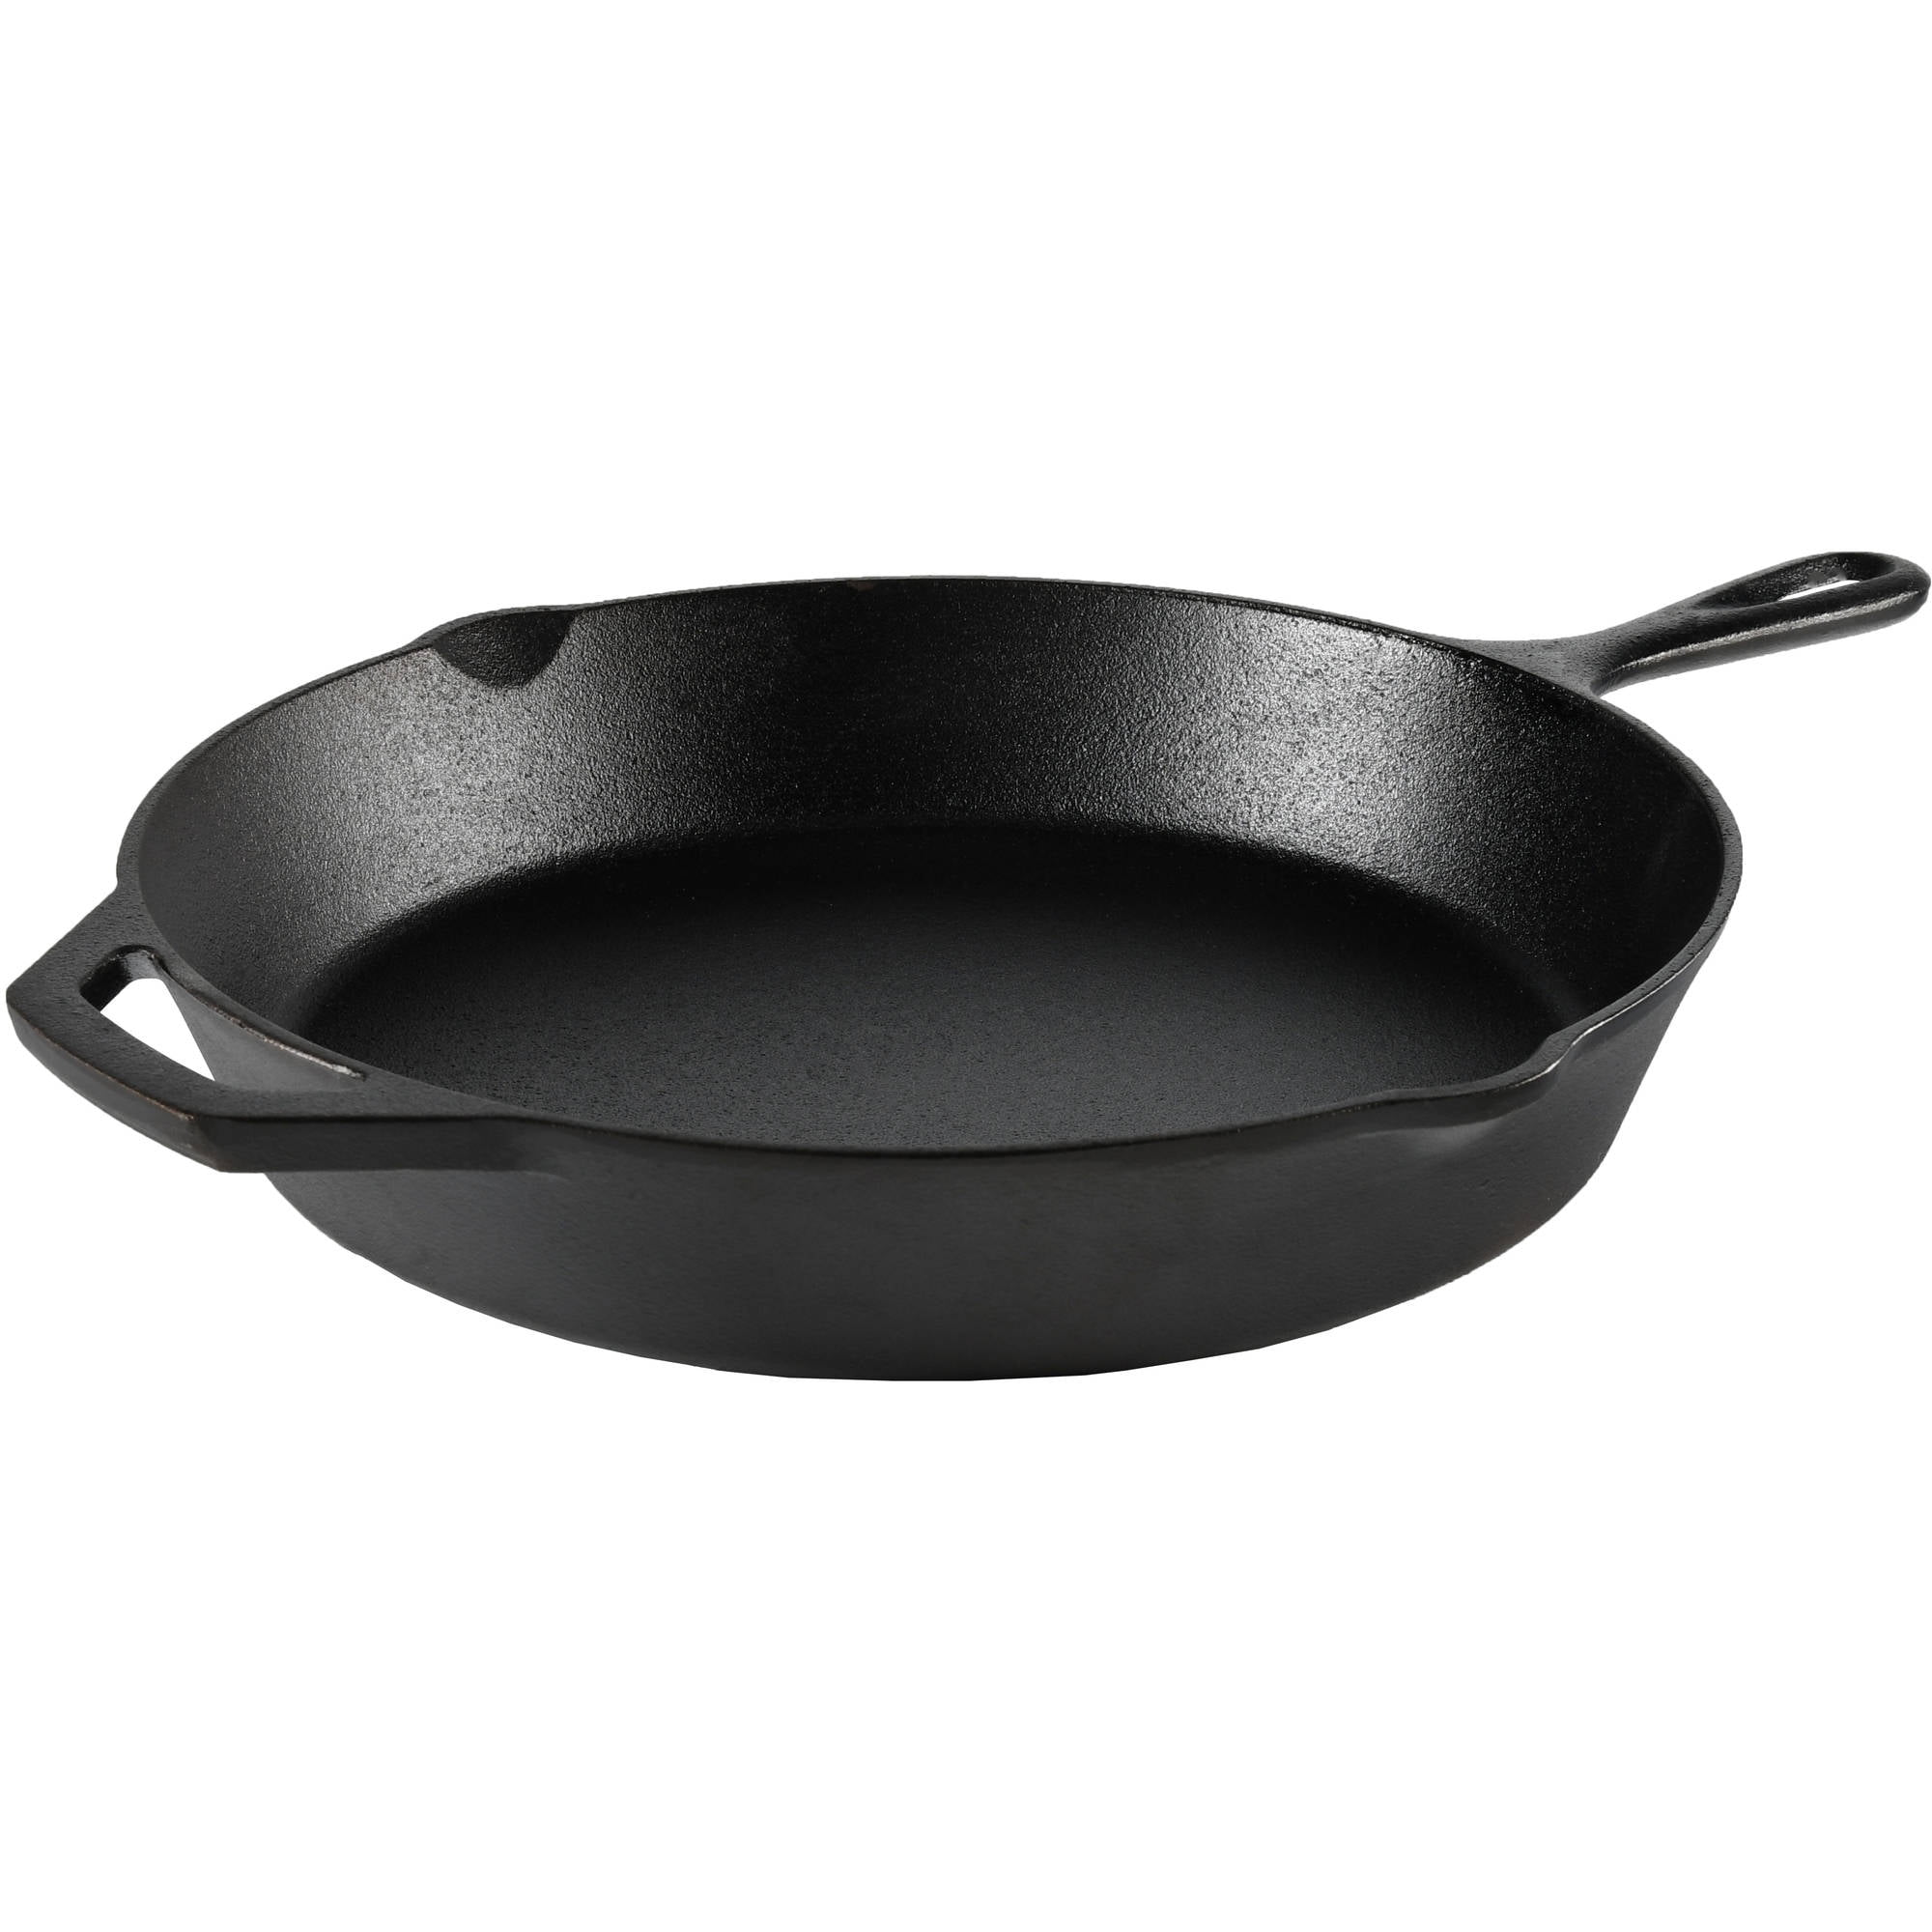 Solid Cast Iron Frying Pan Cast Iron Skillet Camping Cookware Cast Iron Cookware 